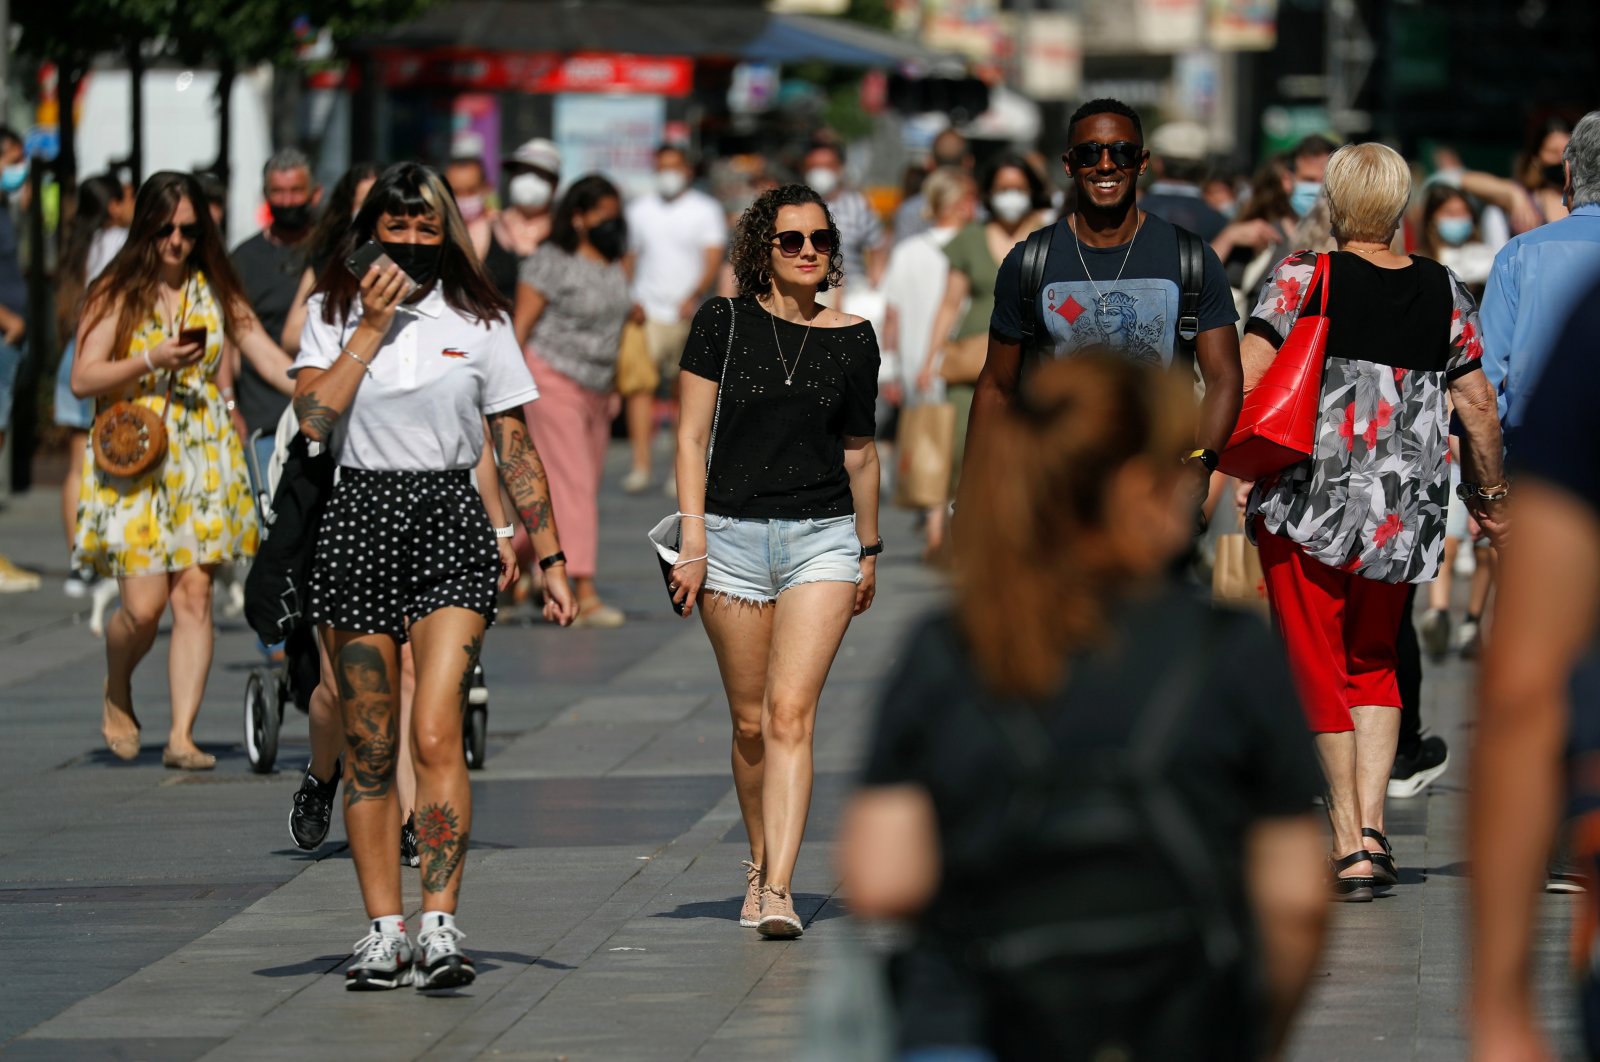 People walk in the streets of Madrid, many maskless as they are no longer required outdoors despite the ongoing COVID-19 pandemic, Madrid, Spain, June 26, 2021. (Reuters Photo)